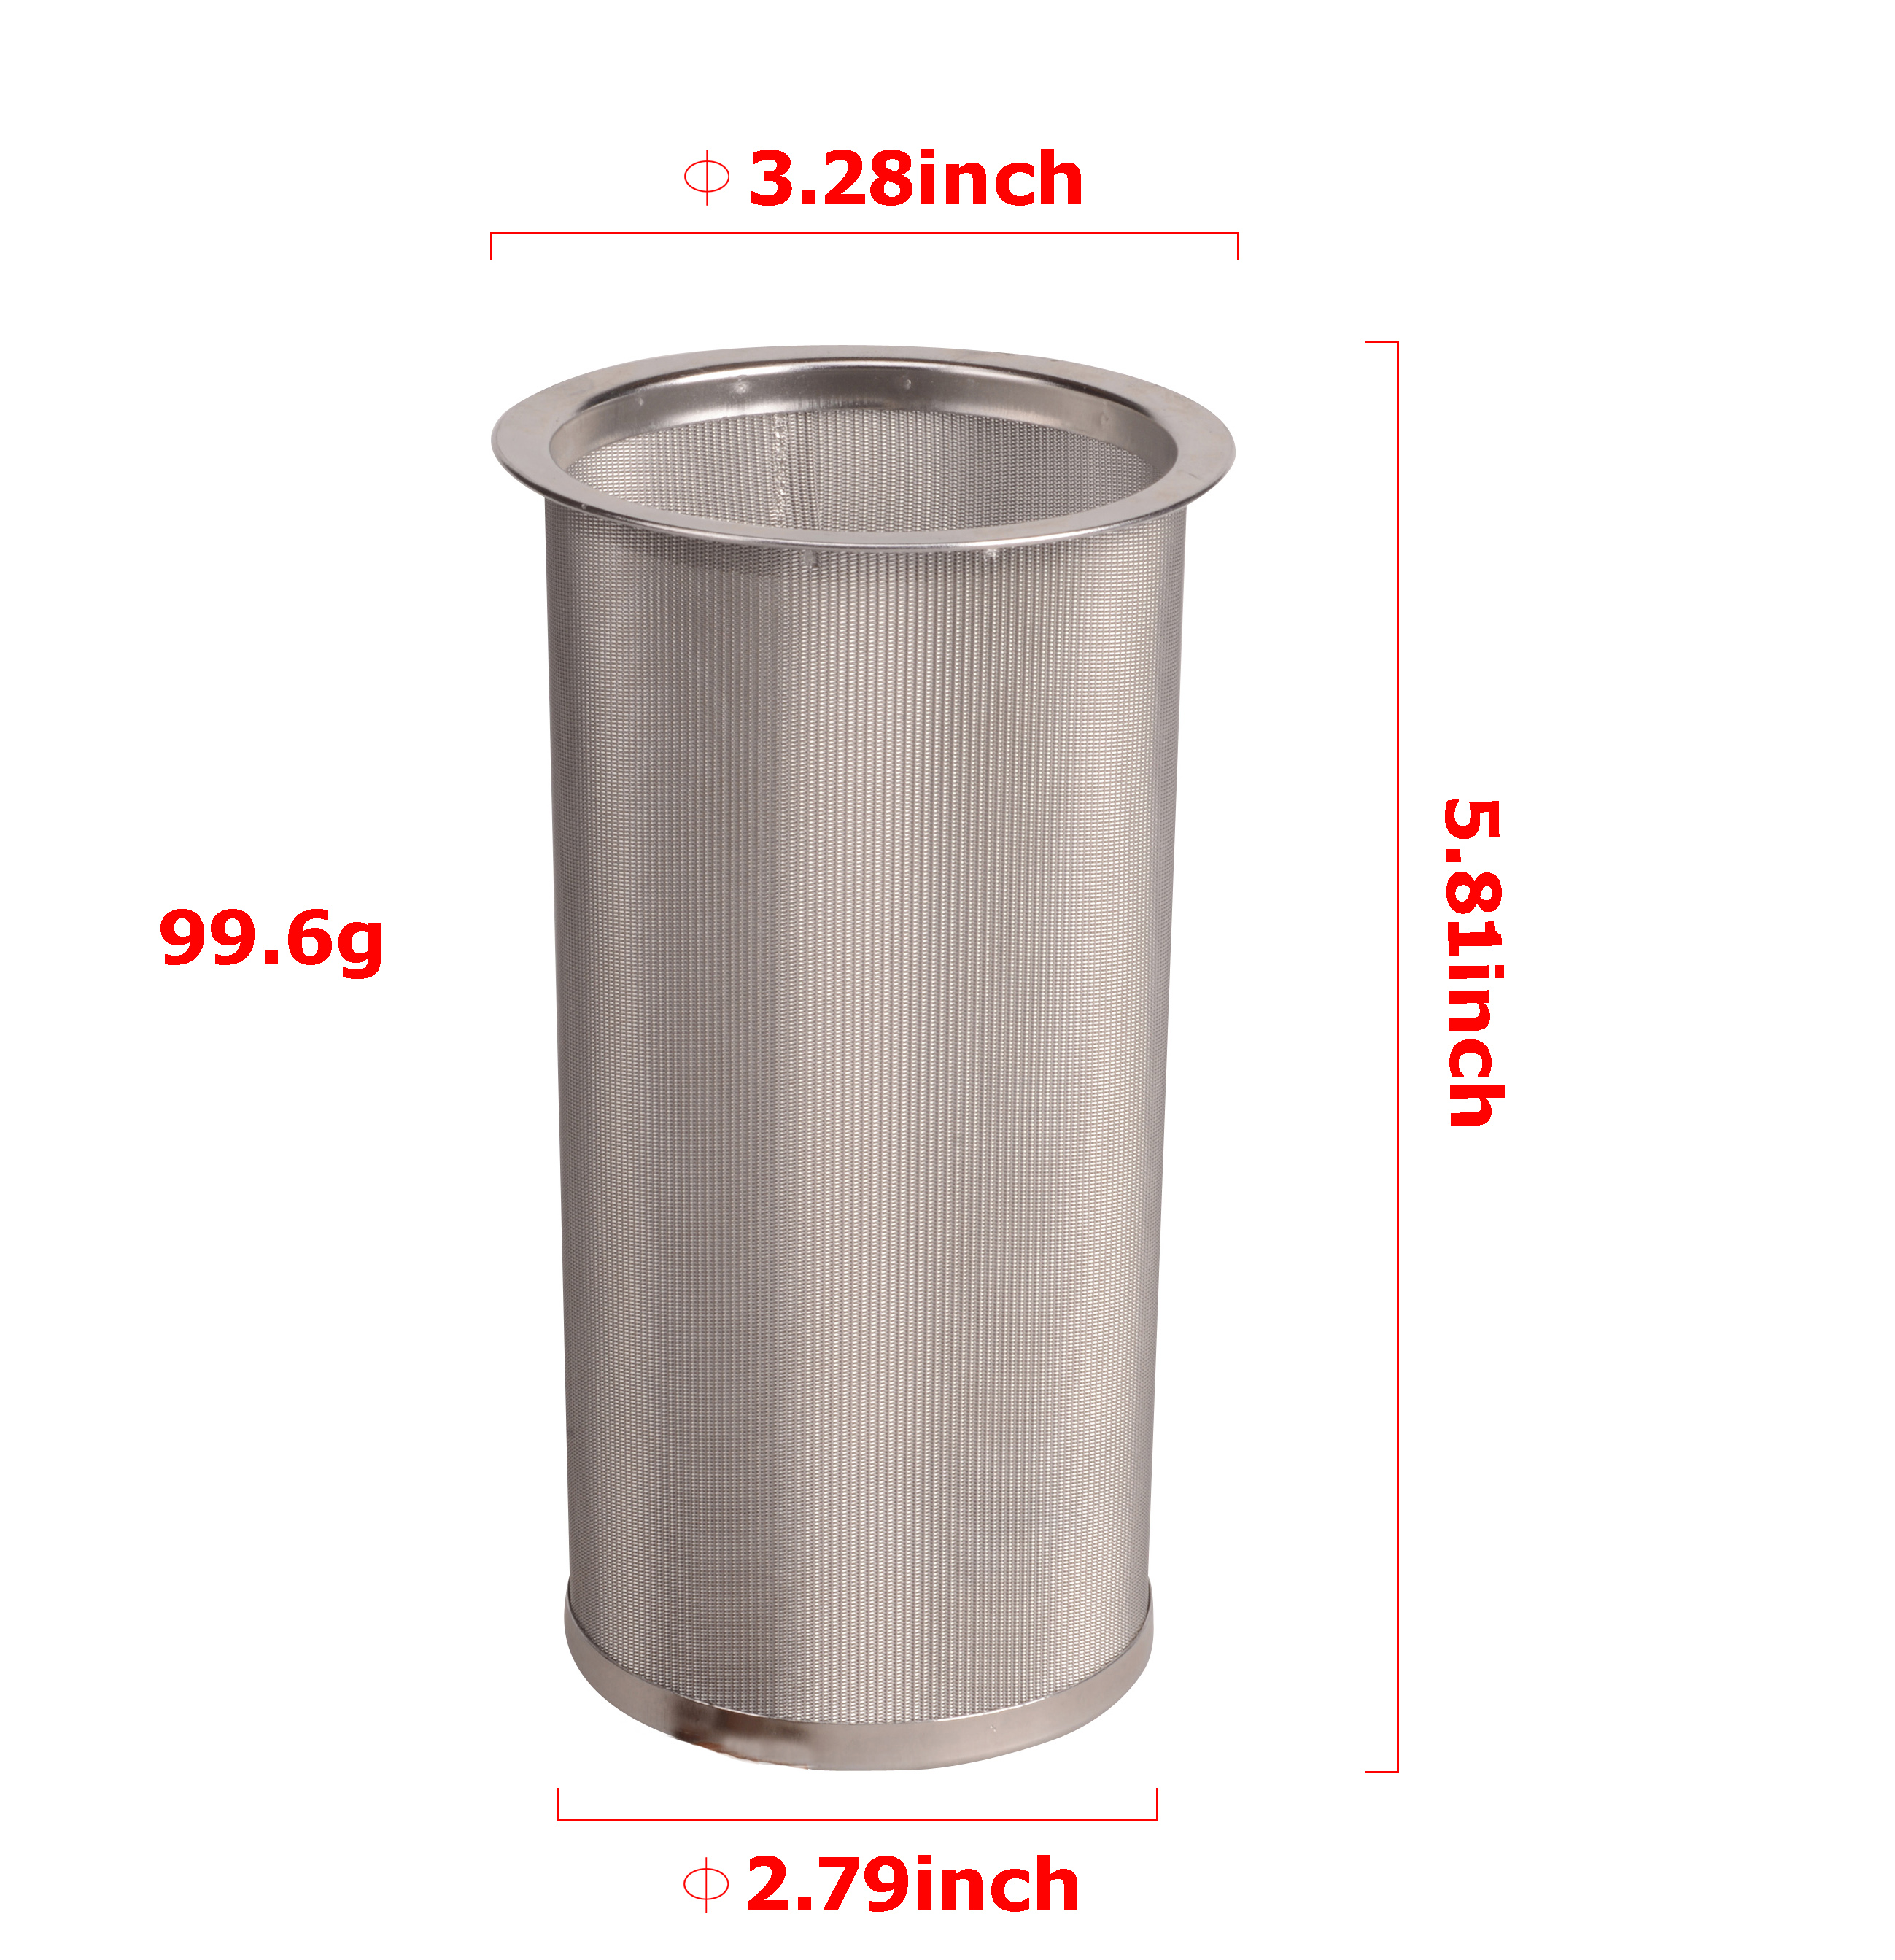  Cold brew Durable Fine Mesh Stainless Steel coffee maker/tea infuser fit Regular Mouth Mason Canning Jars (Filter only)